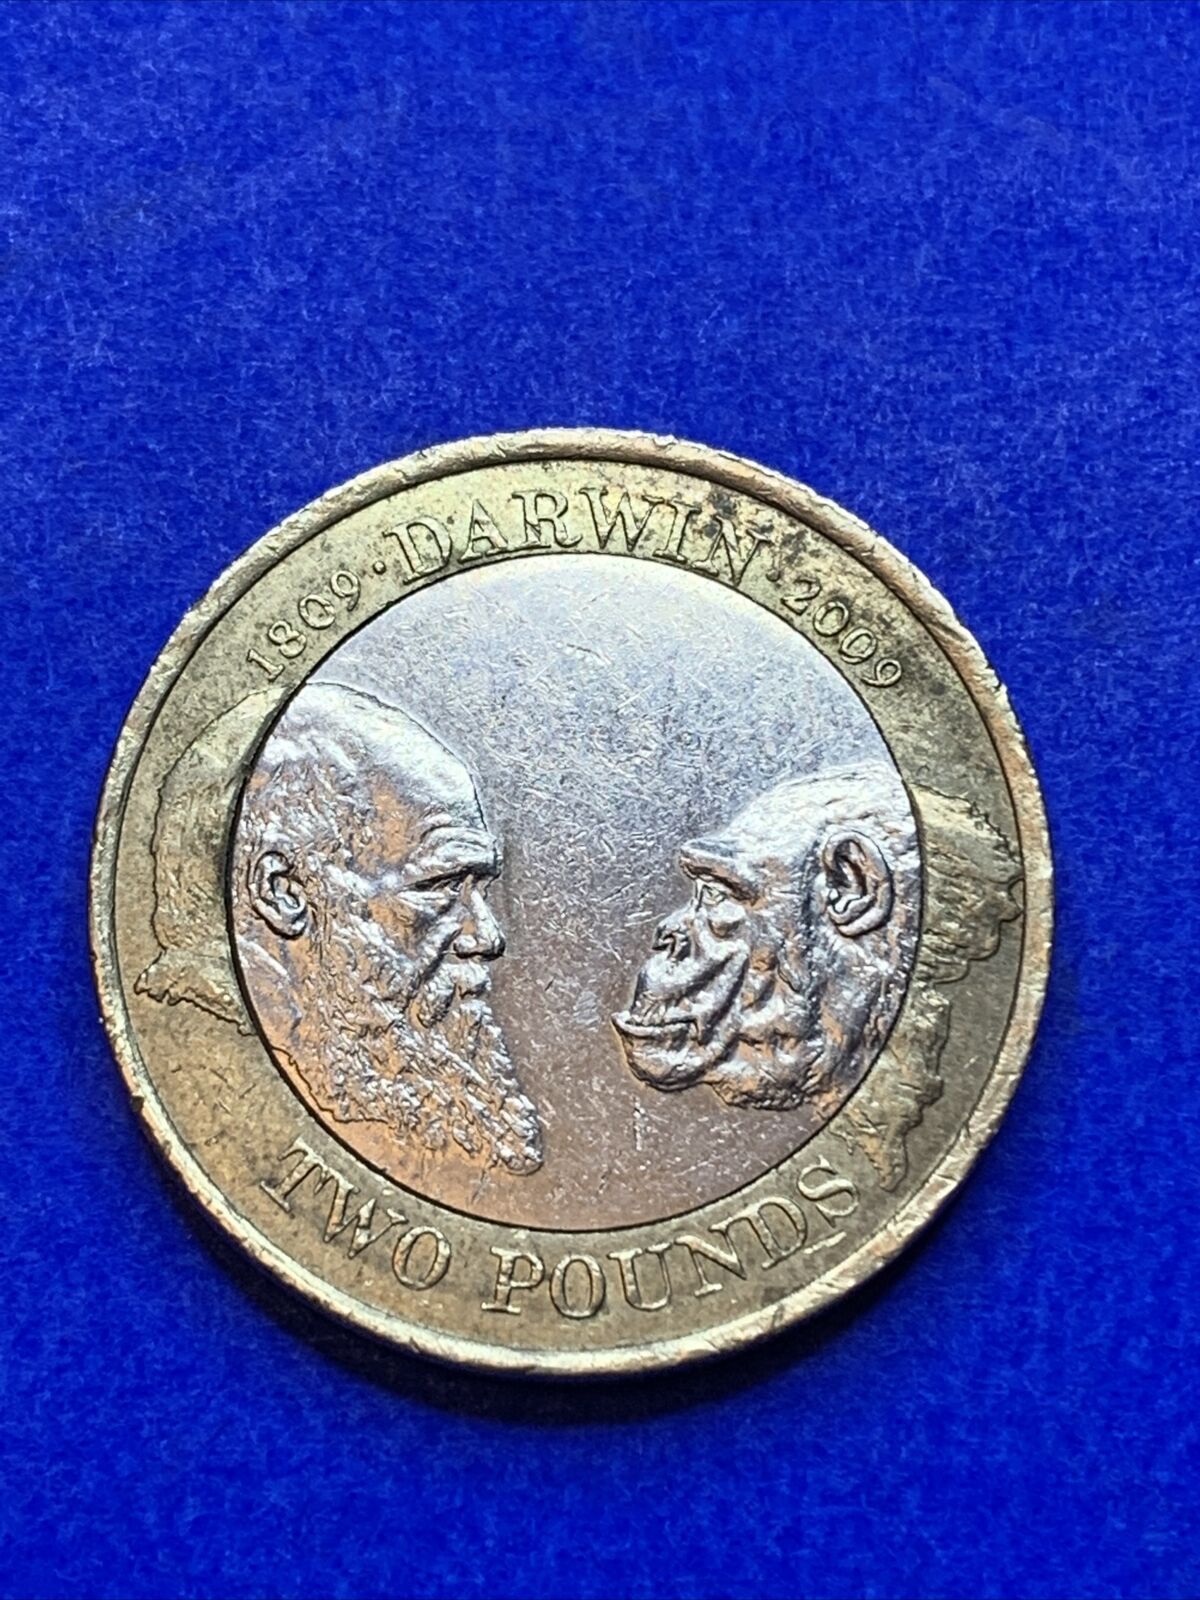 VERY RARE CHARLES Dickens 2 pound coin with minting errors , £ - PicClick UK